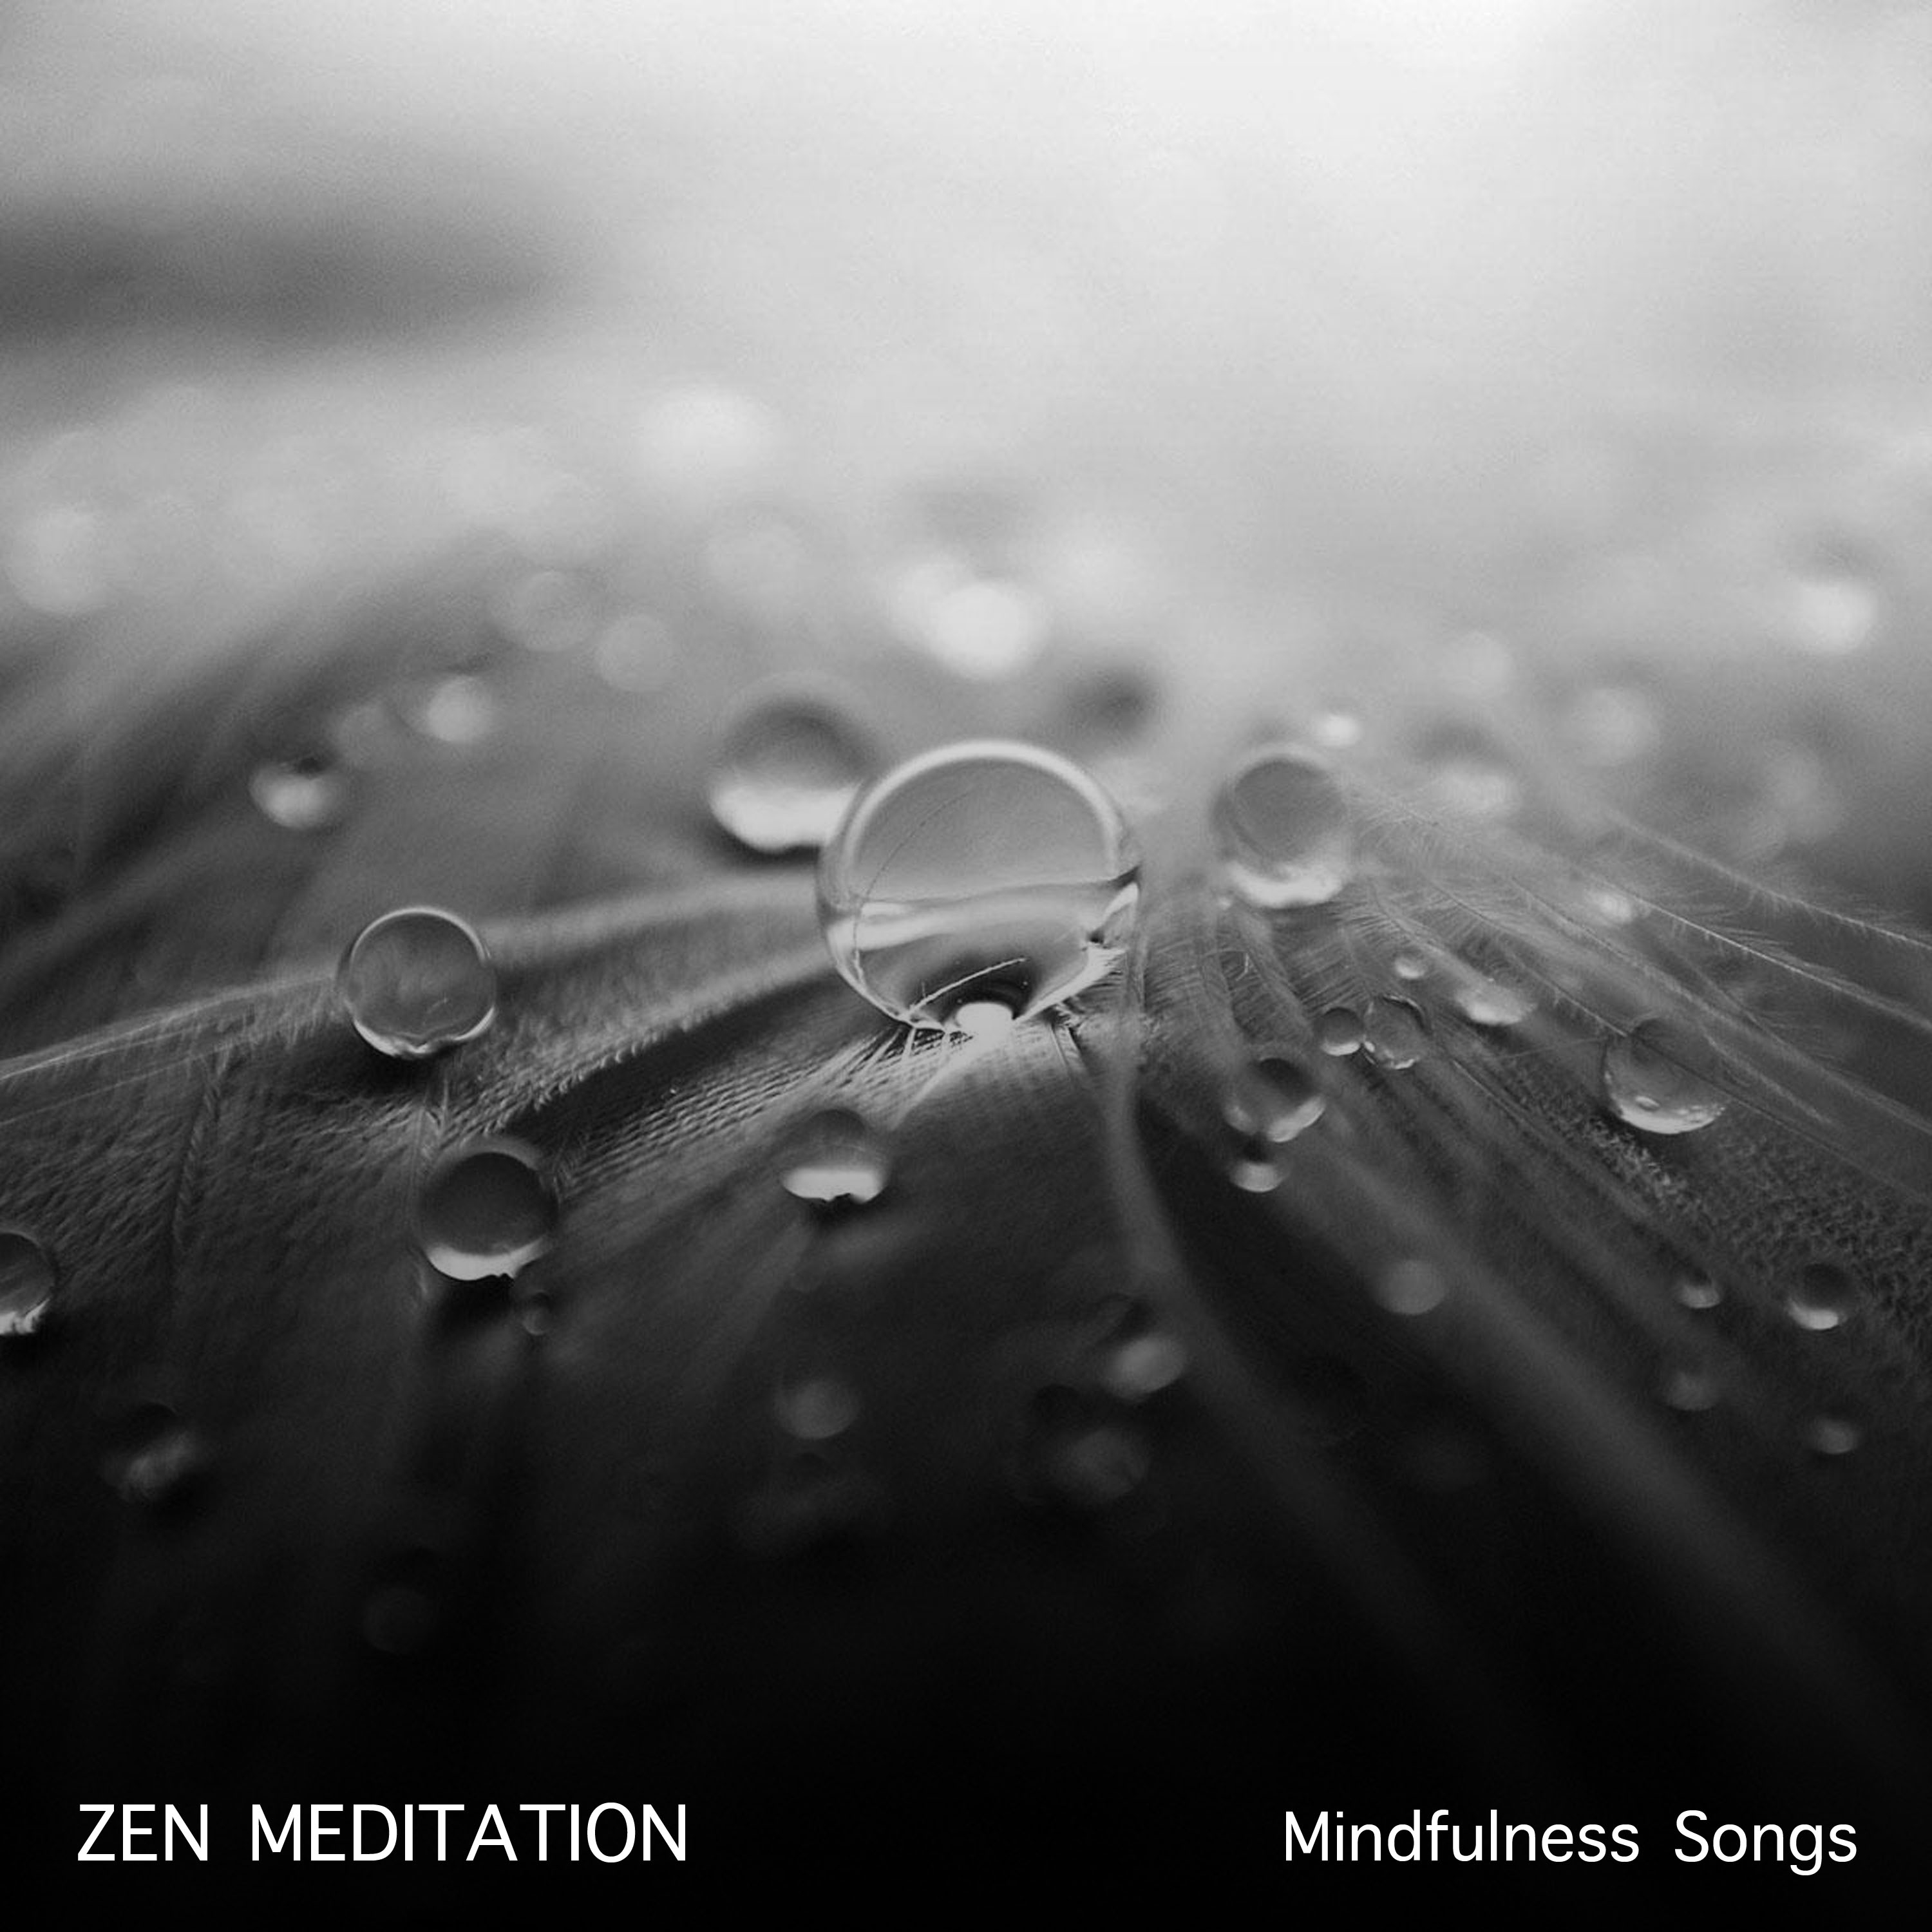 18 Zen Meditation and Mindfulness Songs